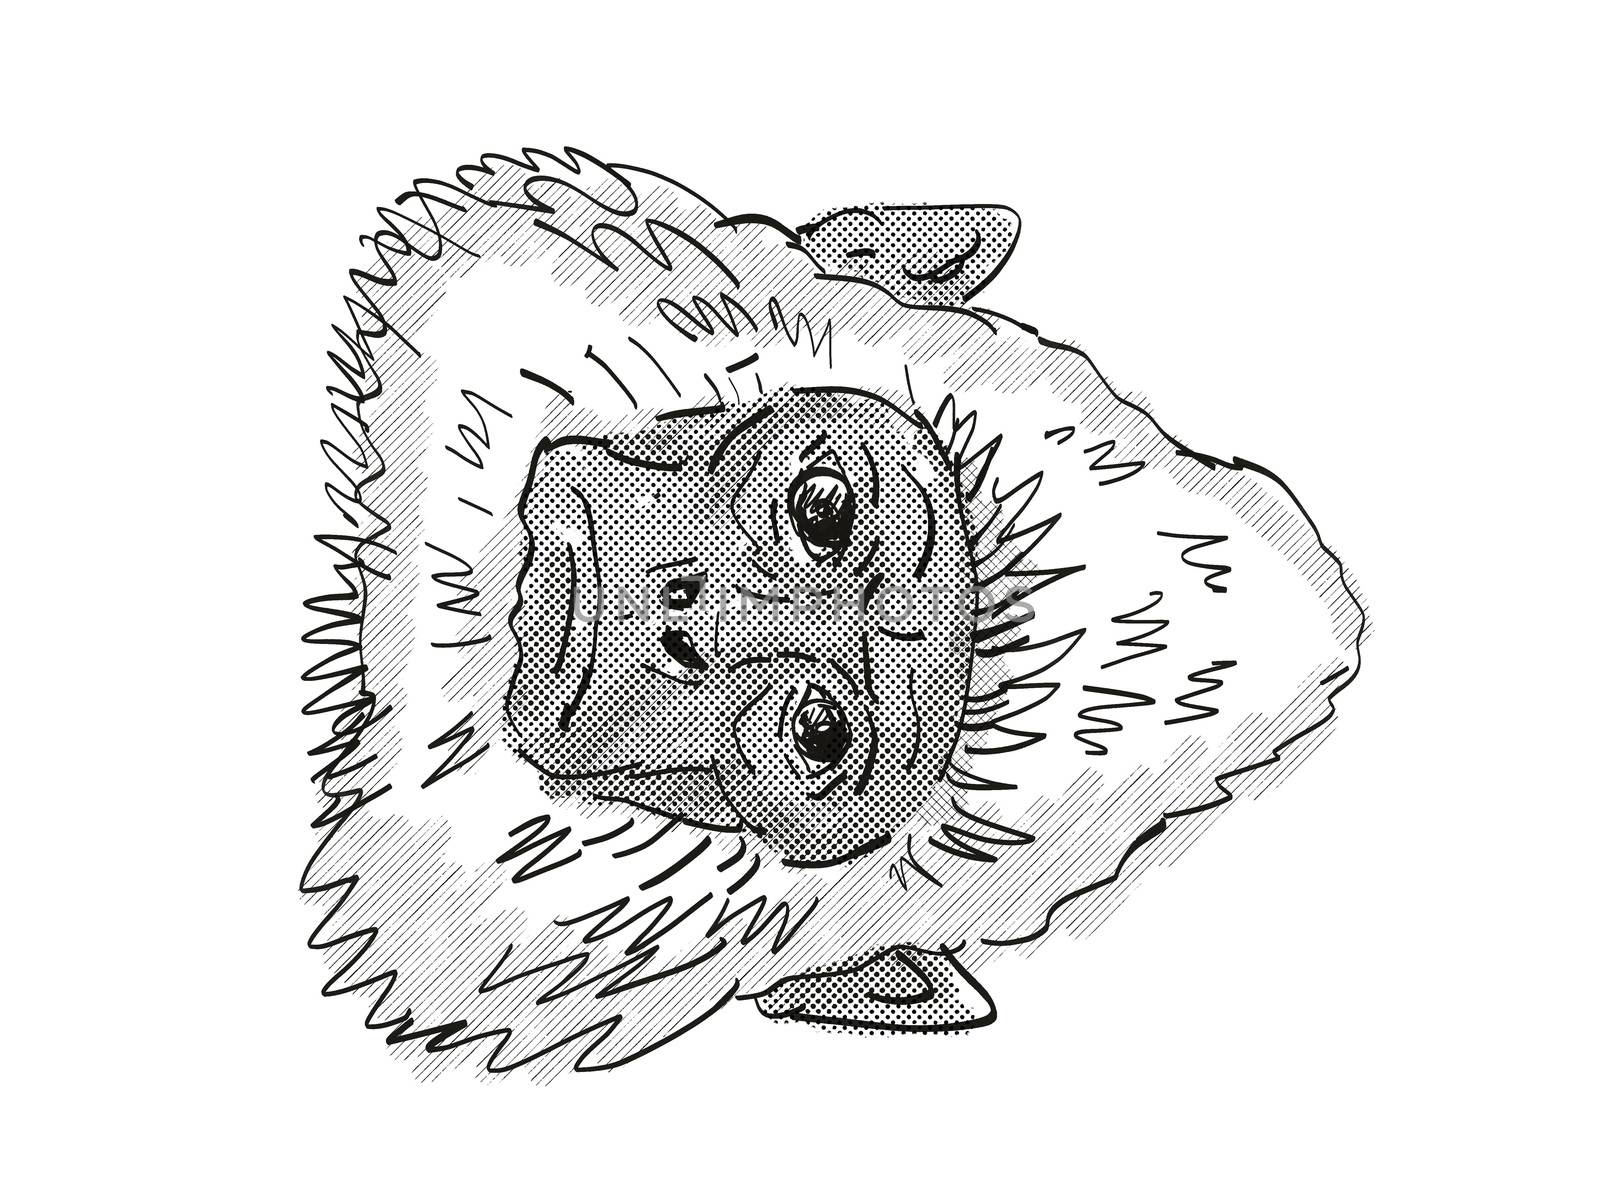 Retro cartoon style drawing head of a Sri Lankan Gray Langur, a monkey species viewed from front on isolated white background done in black and white